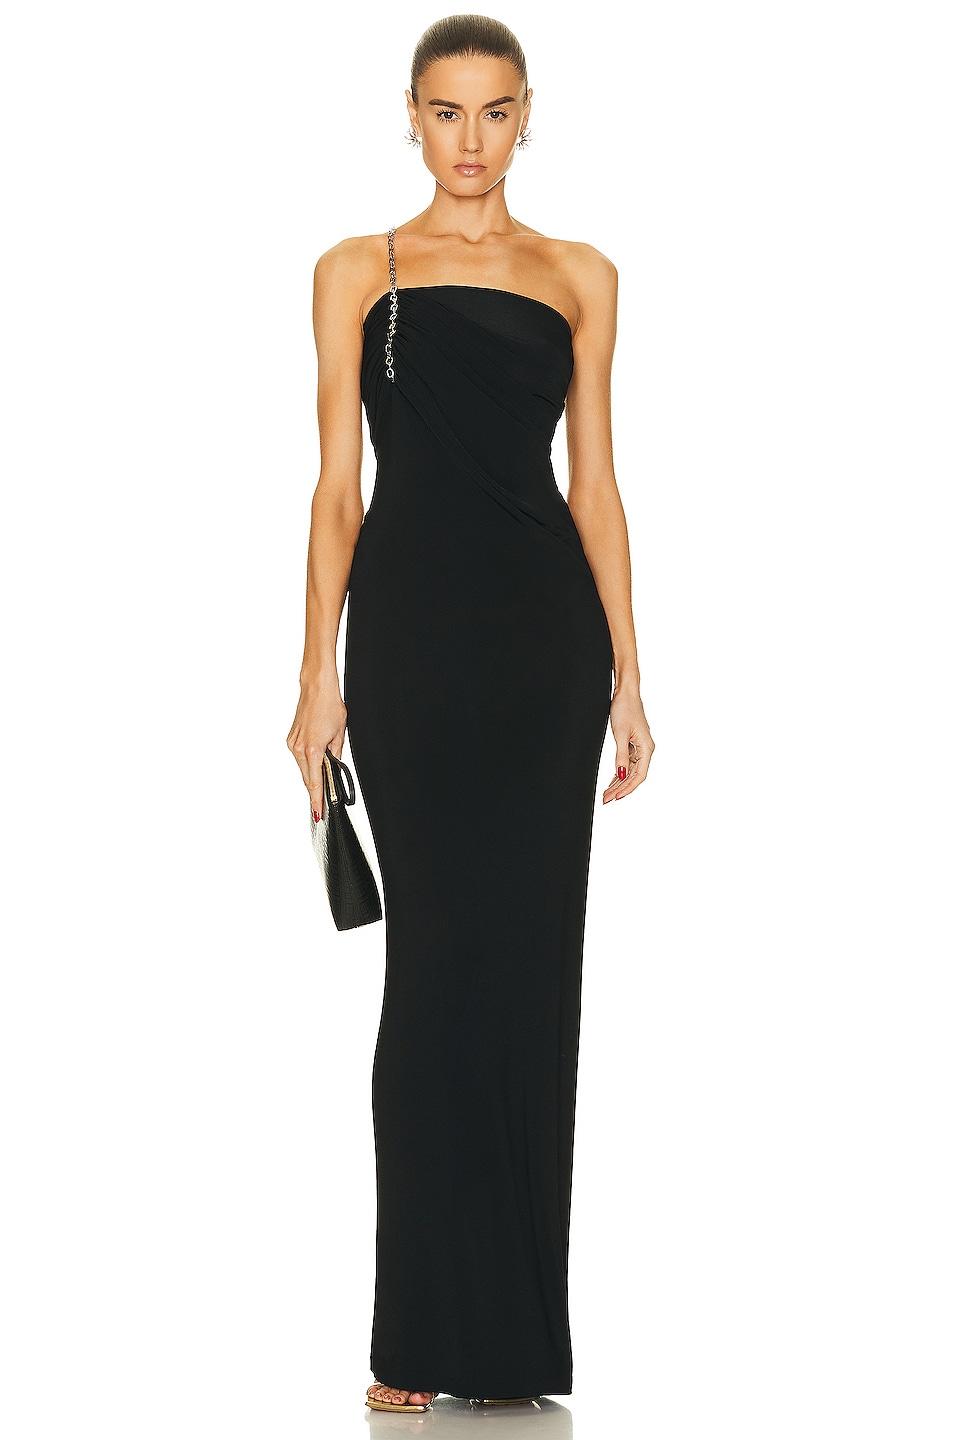 Givenchy Asymmetric Draped Bustier Gown in Black | Lyst